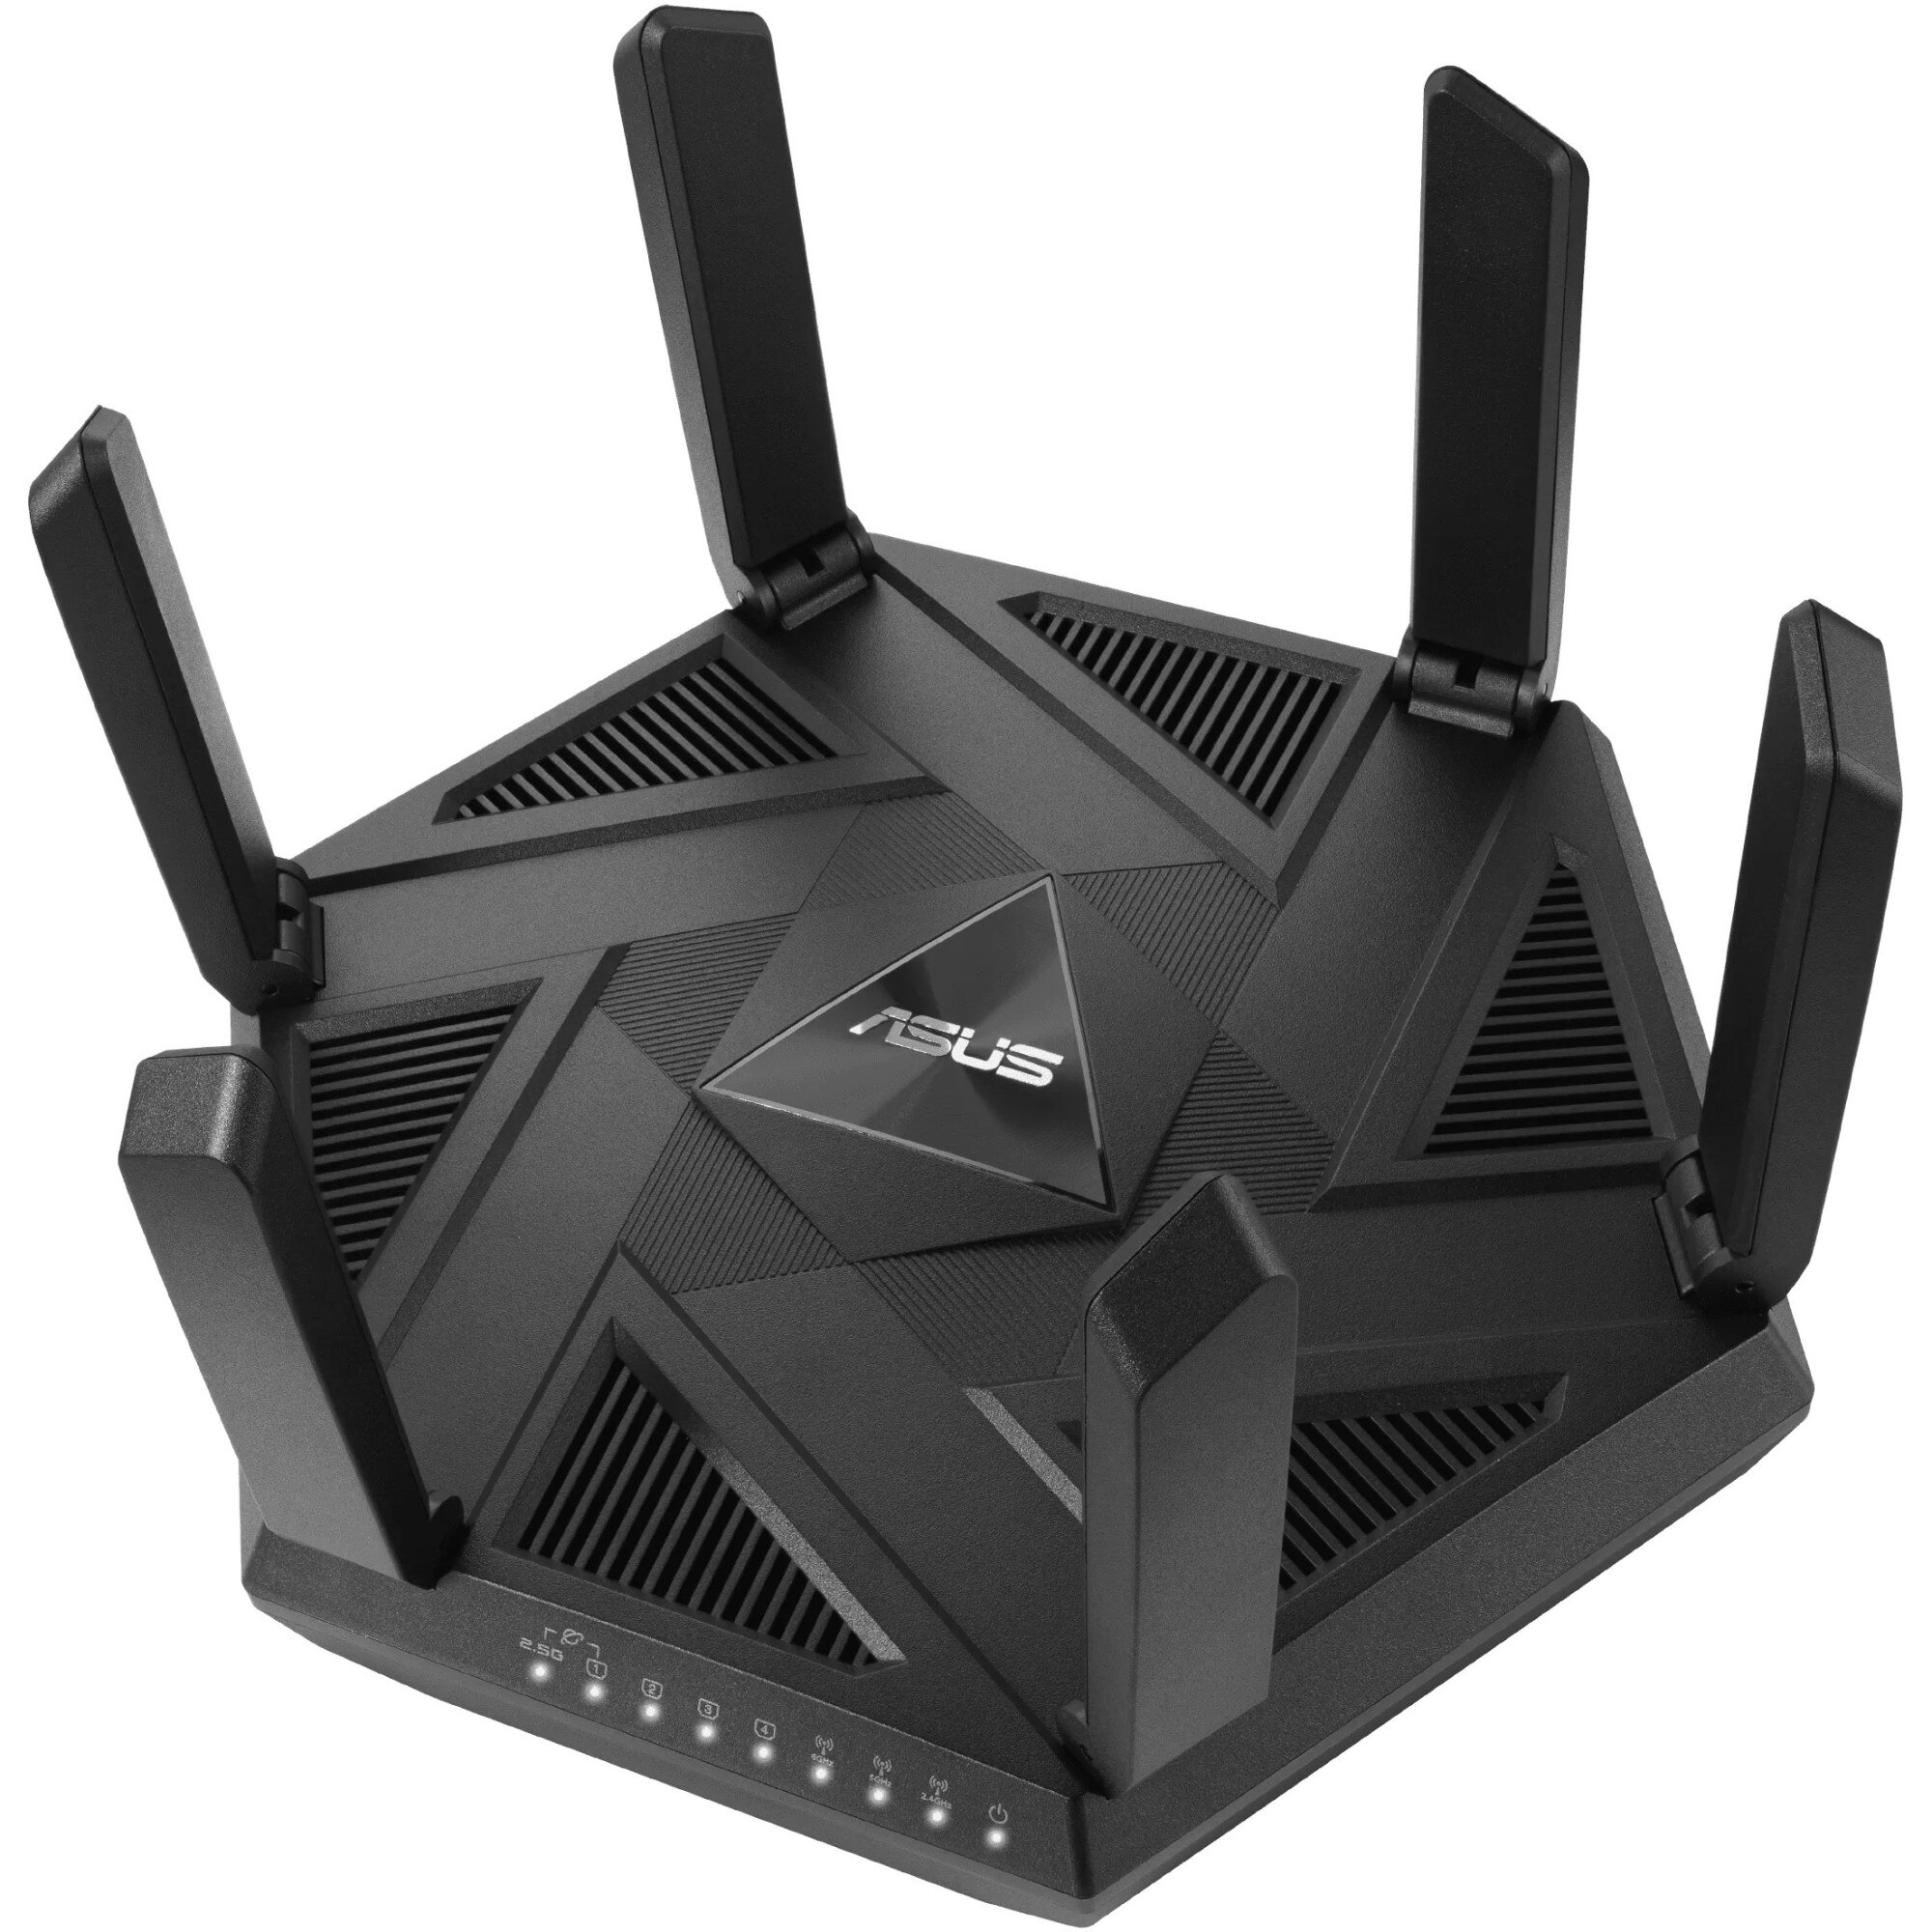 Fotografie Router Gaming Wireless ASUS RT-AXE7800, AXE7800, Tri-Band, Quad-Core 1.7GHz CPU, 256MB/512MB Flash/RAM, 2.5G port, AiProtection Pro, Adaptive QoS, VPN Fusion, Instant Guard, IPTV, OFDMA, MU-MIMO, Beamforming, Link Aggregation, Port forwarding, AiMesh